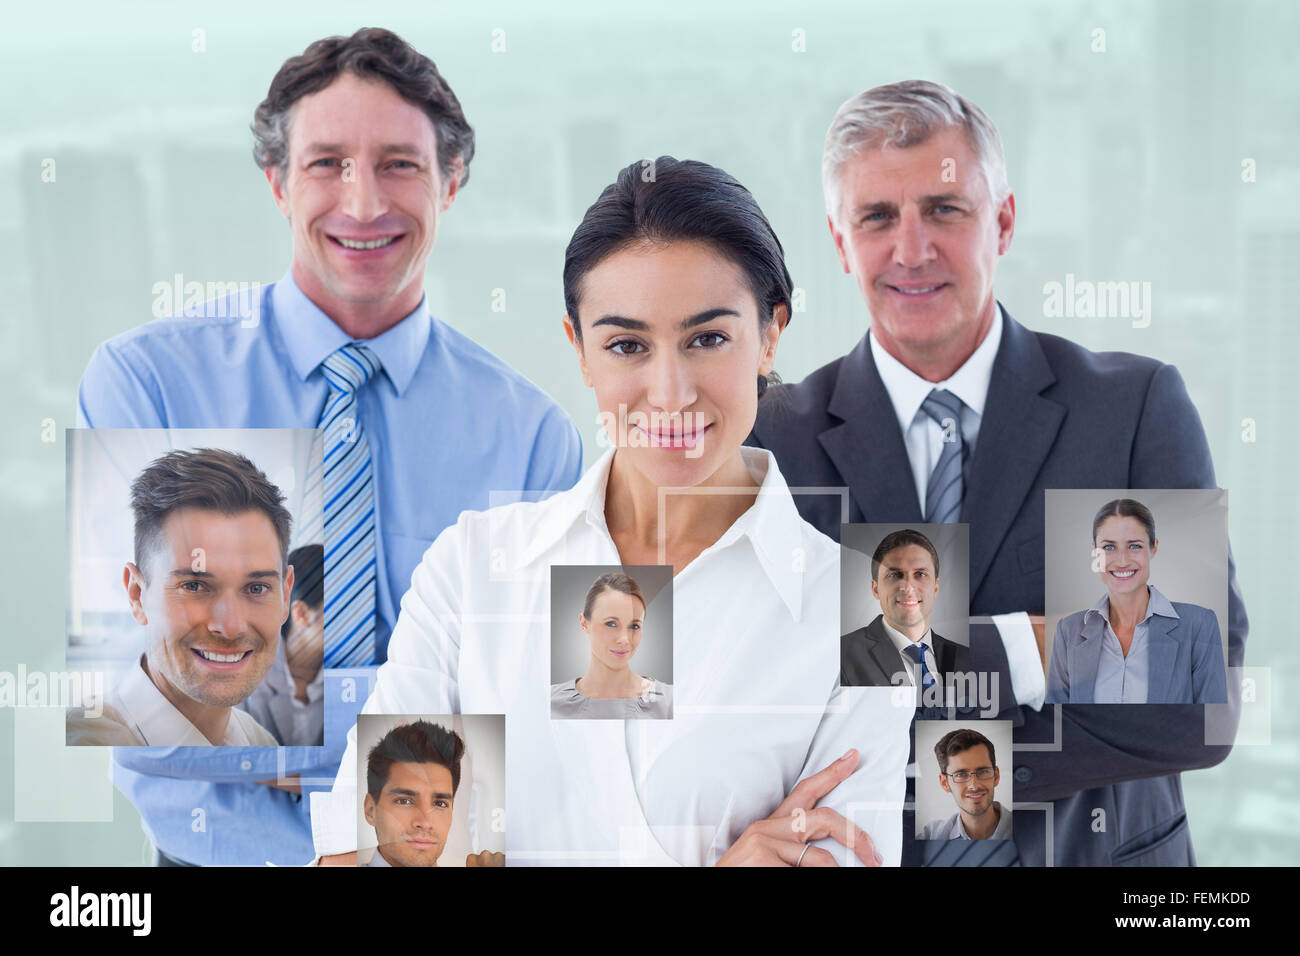 Composite image of smiling business people brainstorming together Stock Photo